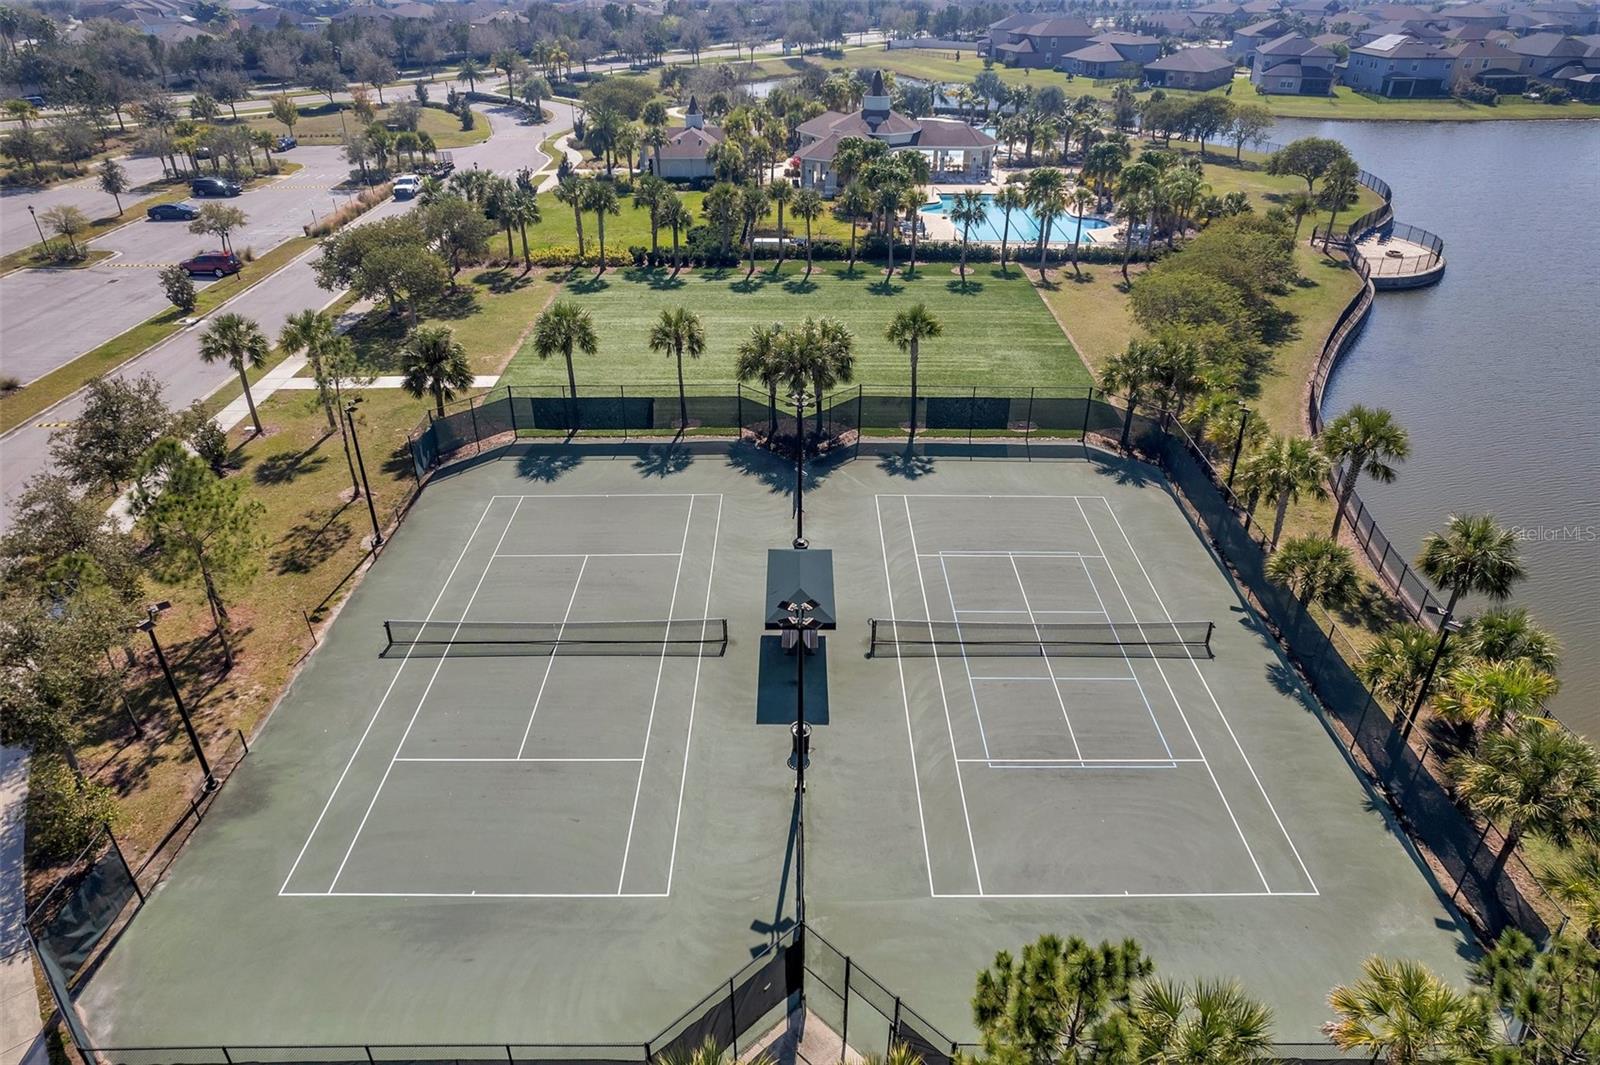 two tennis courts